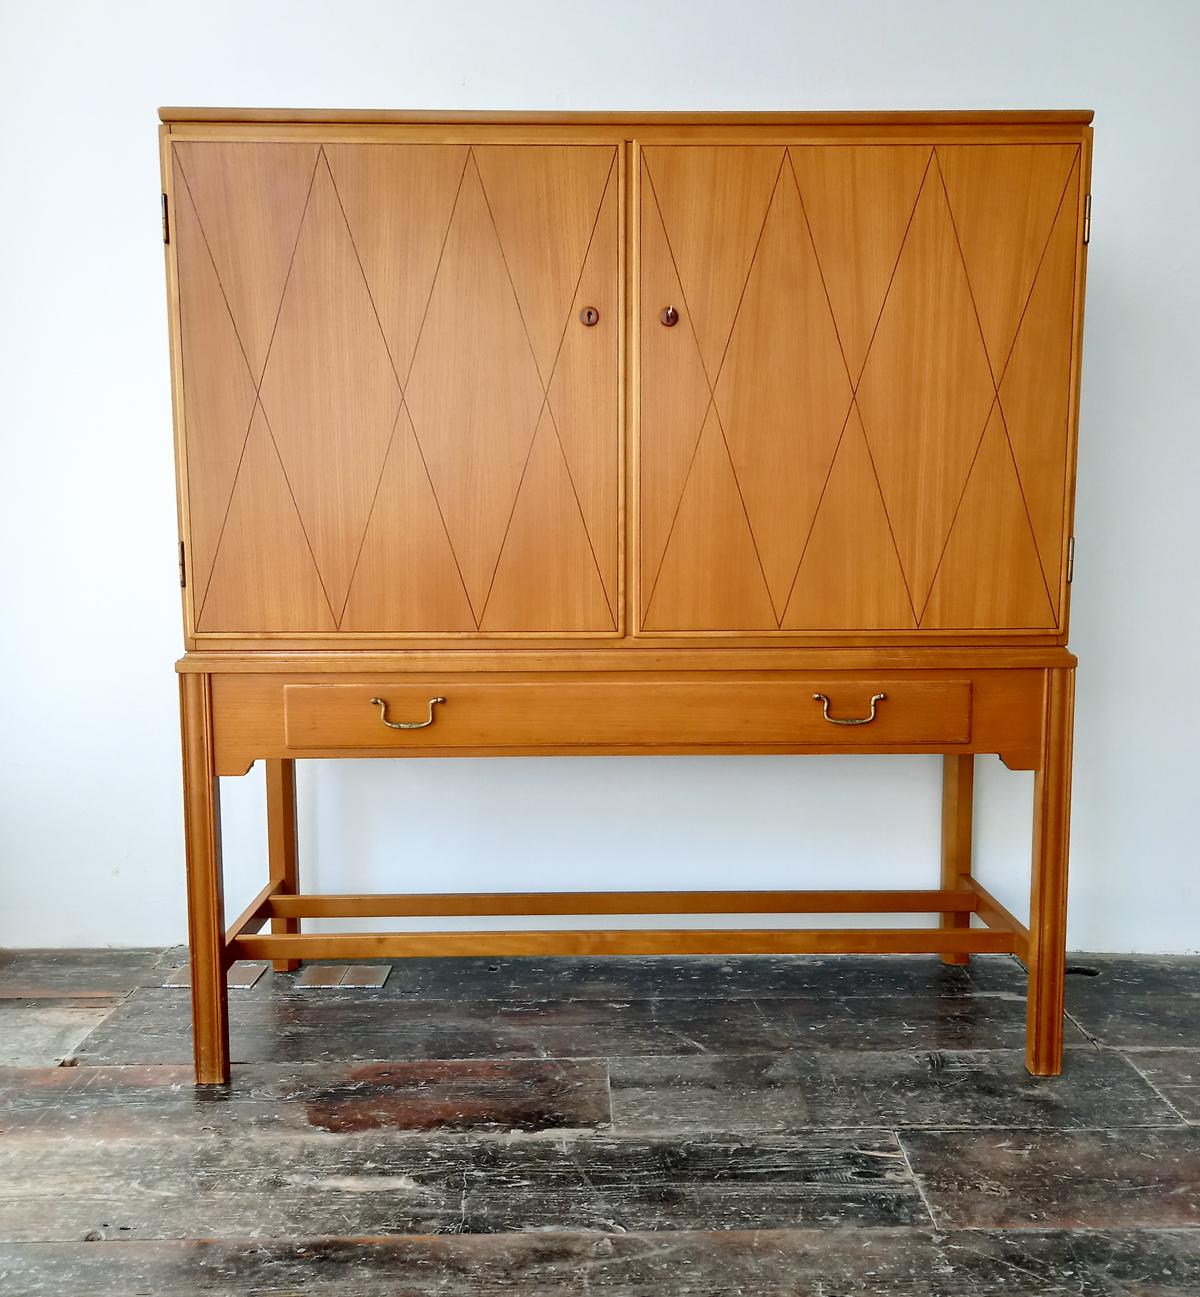 Mid-Century, Scandinavian Modern, Design Classics. 
A stunning cabinet in two-tone birch and walnut designed by Carl-Axel Acking for Nordiska Kompaniet, Sweden 1940s. Comes with a key.

Nordiska Kompaniet.
Stirred by the eye-catching grandeur and